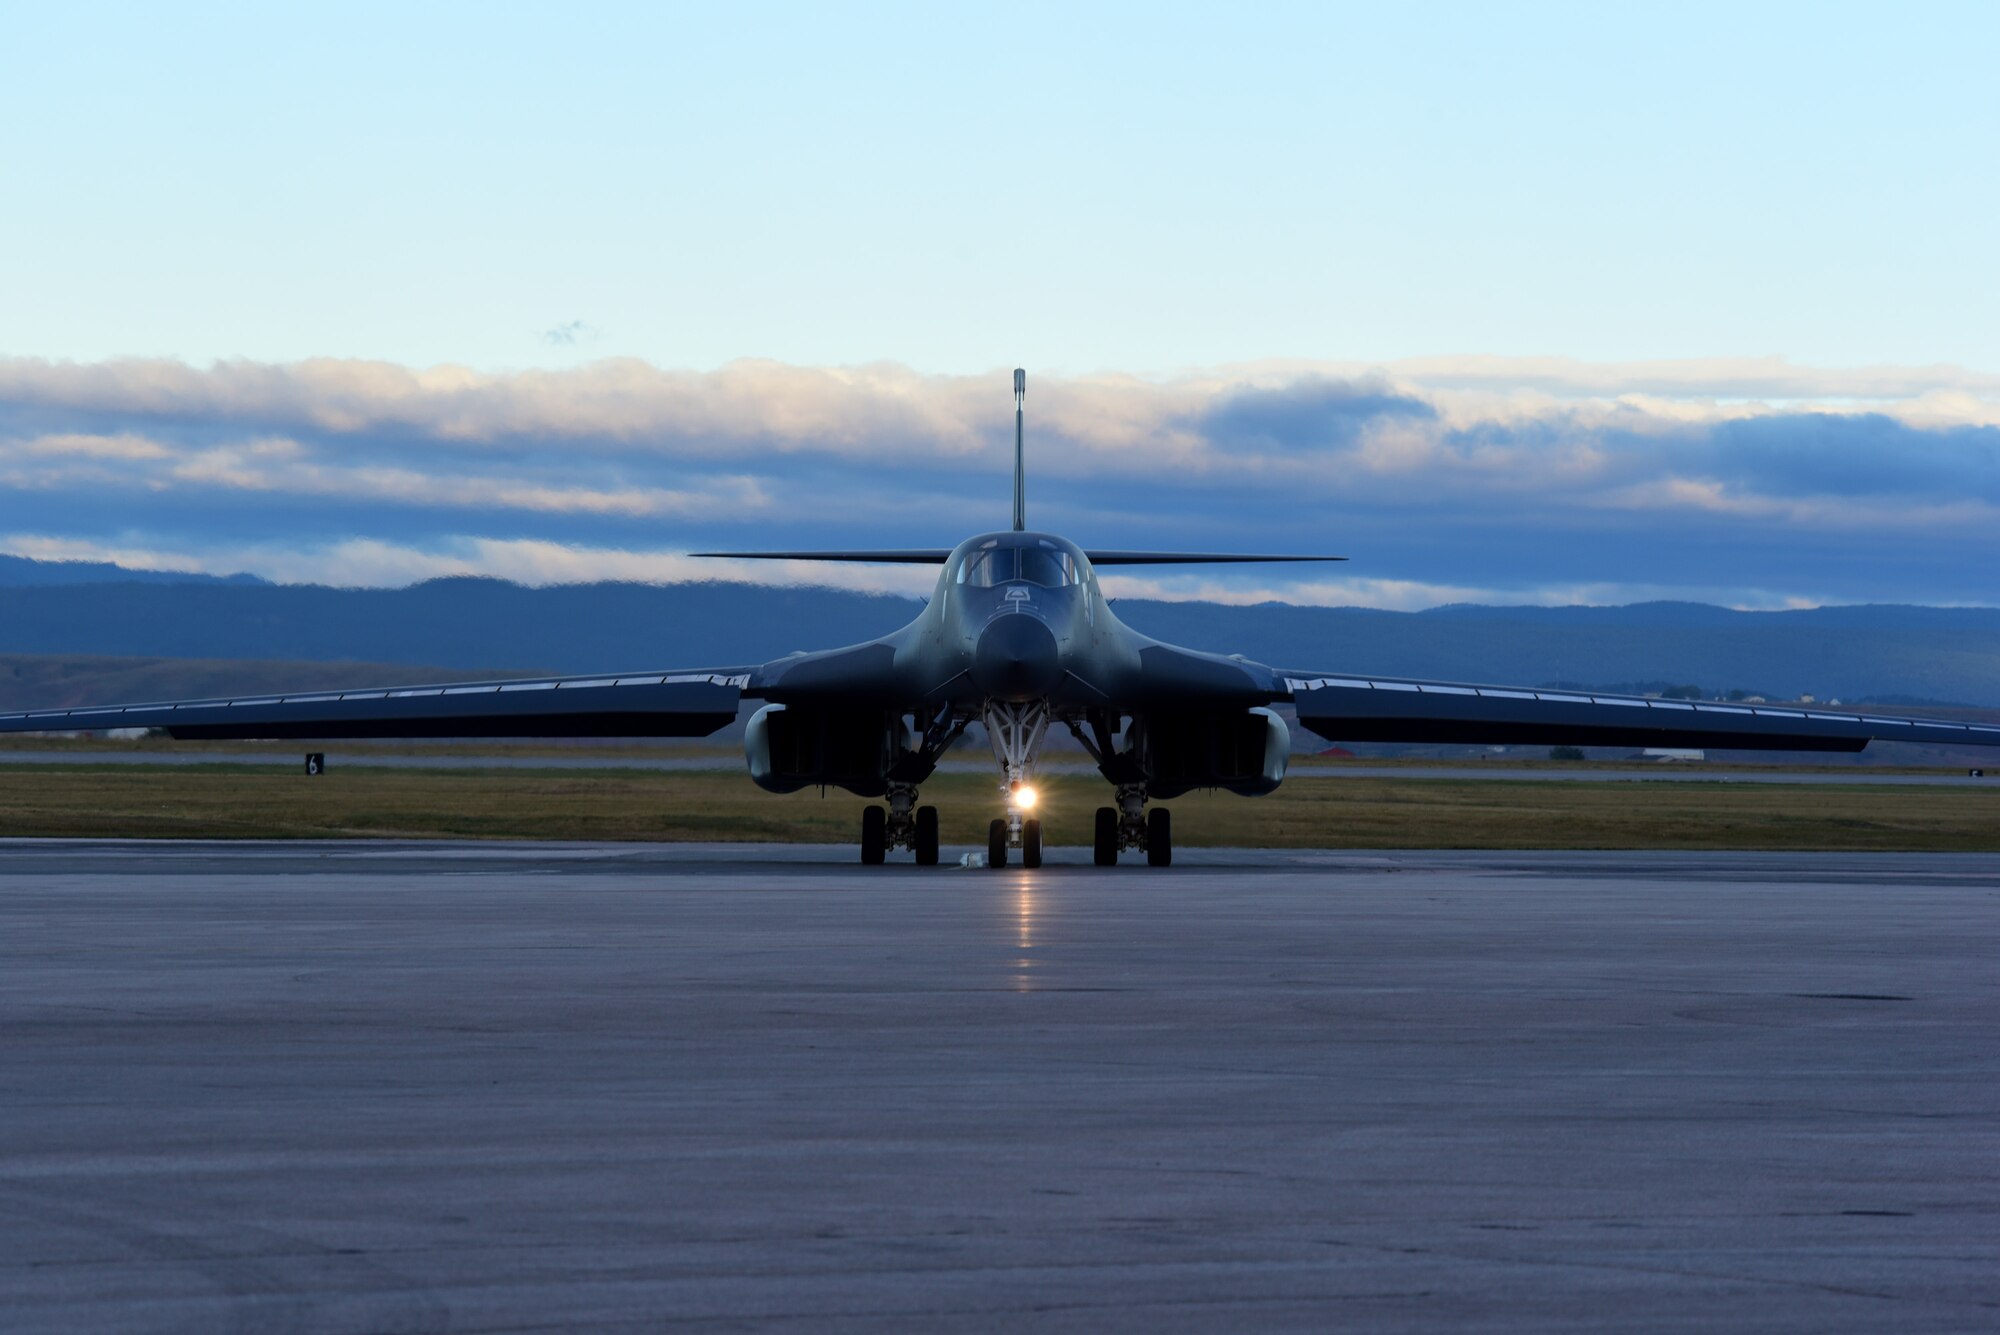 A B-1 bomber prepares for takeoff at Ellsworth Air Force Base, S.D., Sept. 18, 2015. Ellsworth aircraft began conducting training missions in the Powder River Training Complex, allowing for an 85 percent increase in local flight training, ensuring more efficient use of our resources. (U.S. Air Force photo by Airman 1st Class James L. Miller/Released)